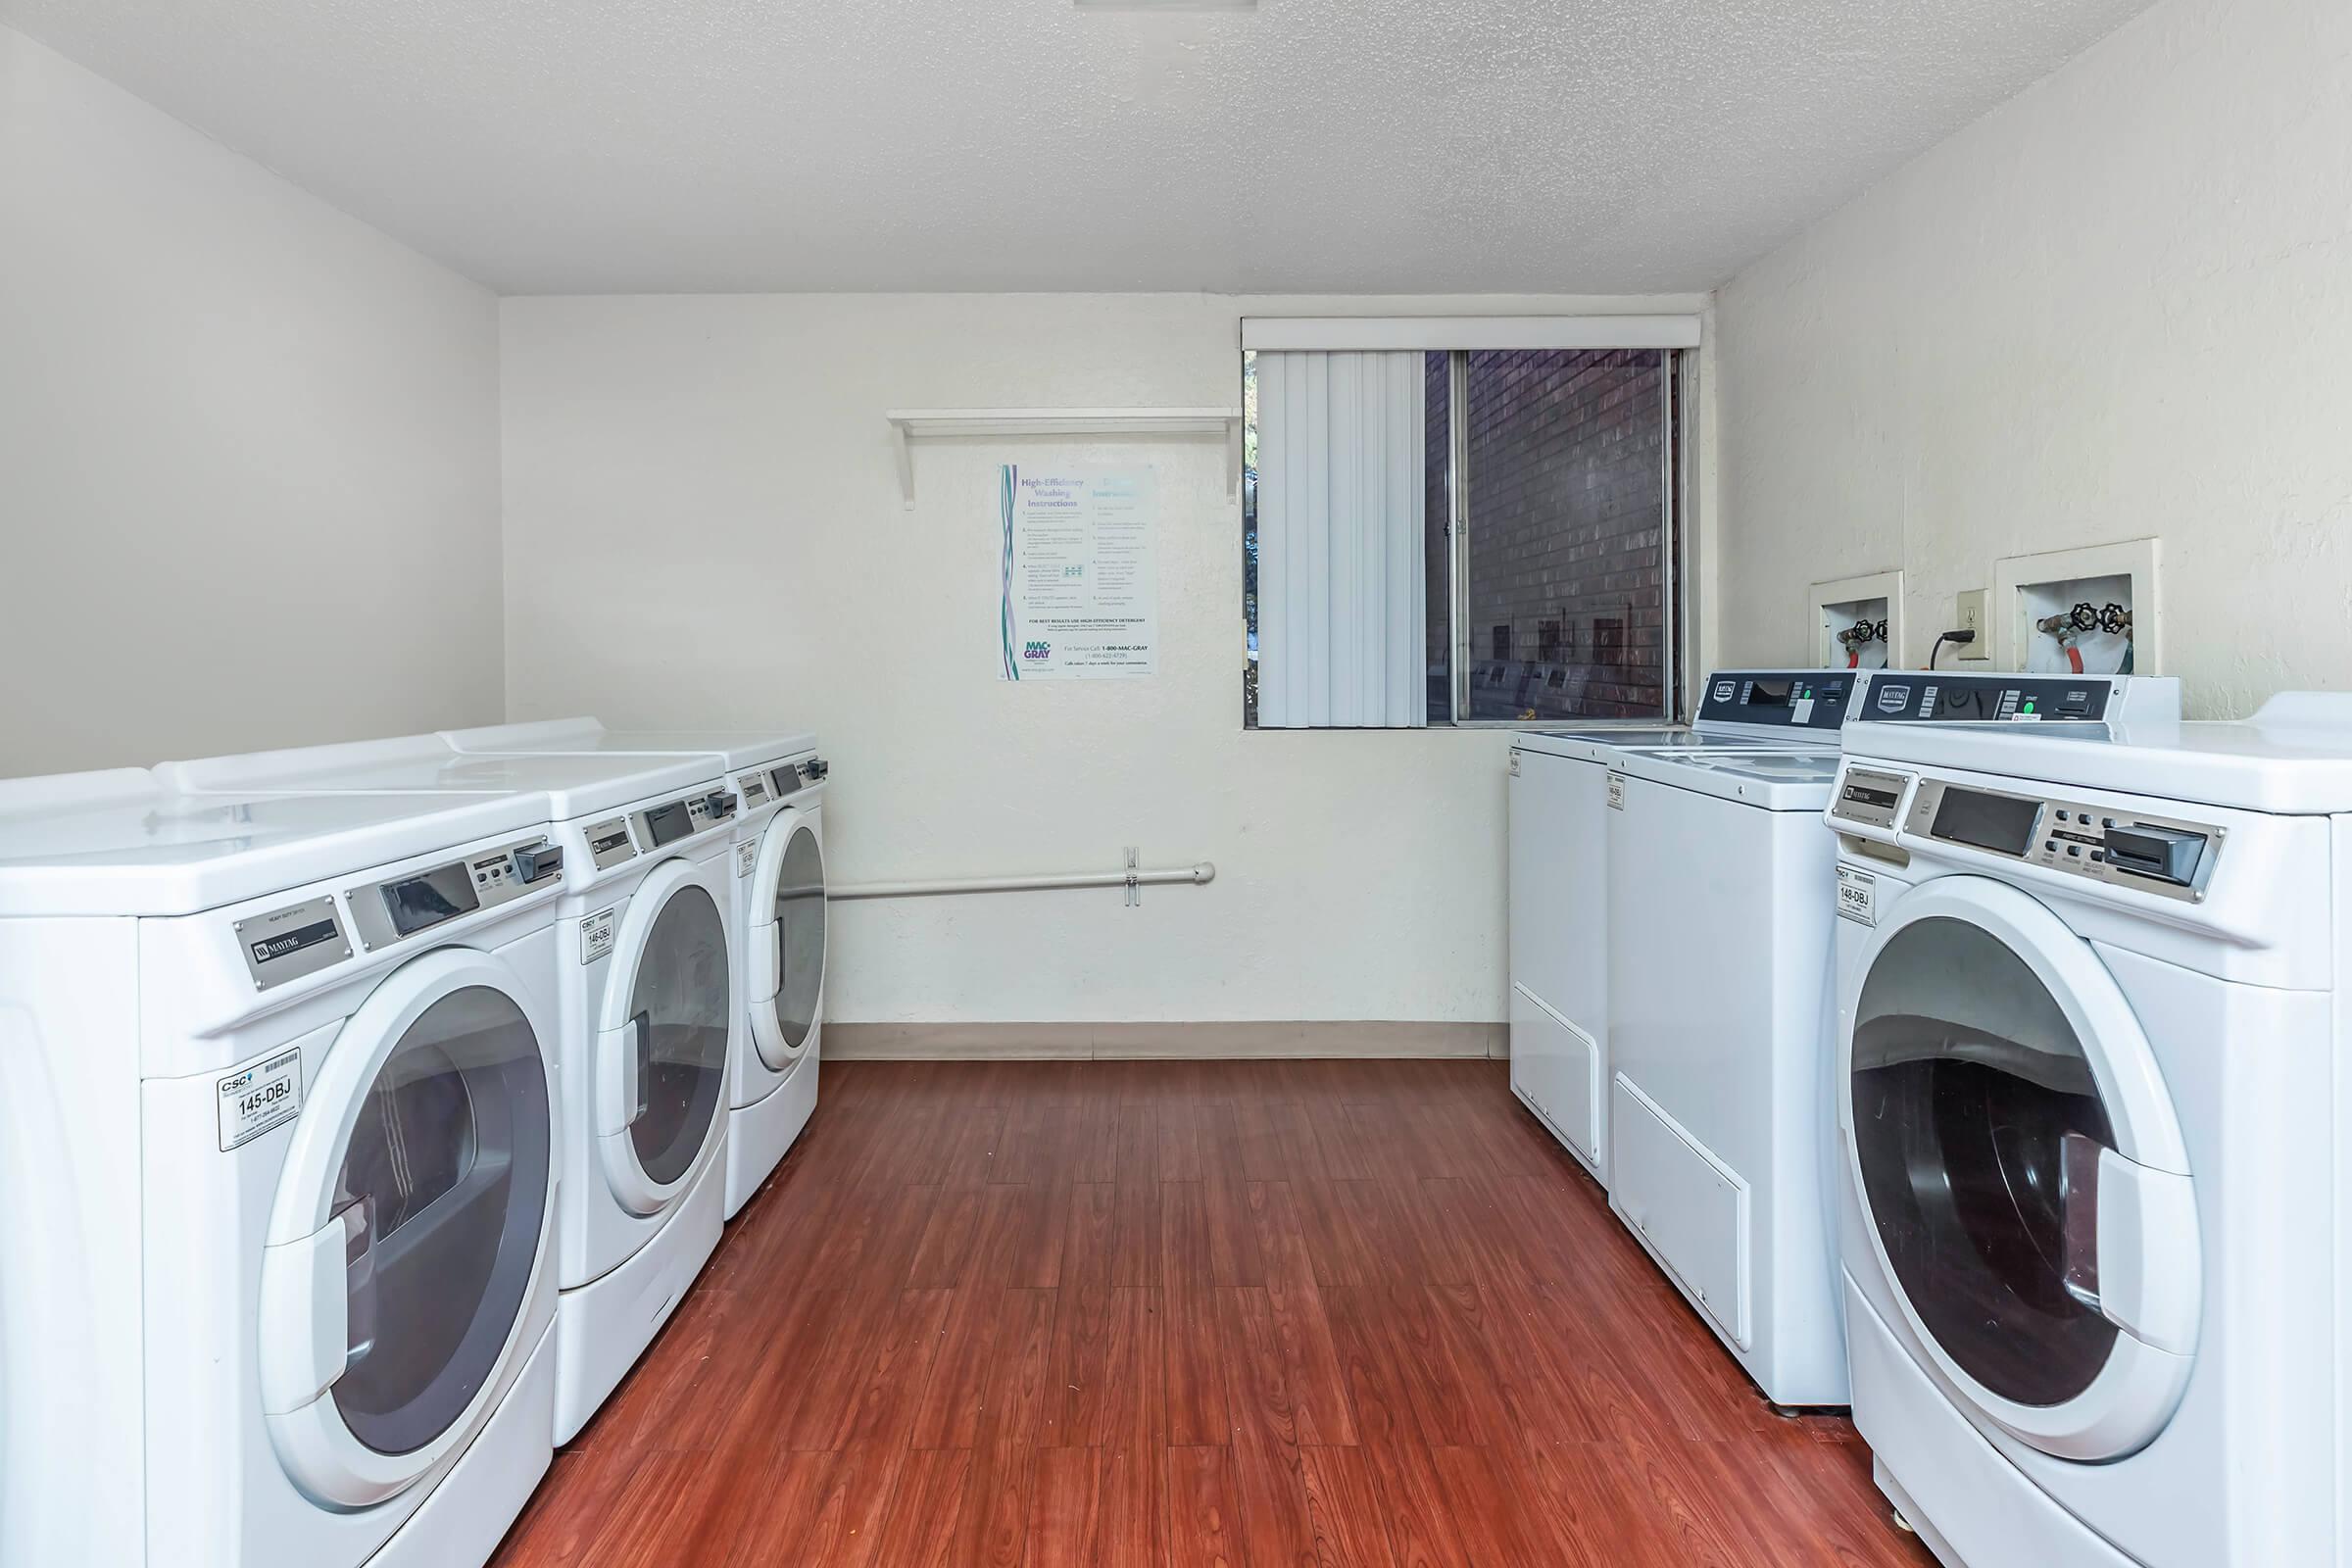 washers and dryers in the community laundry room